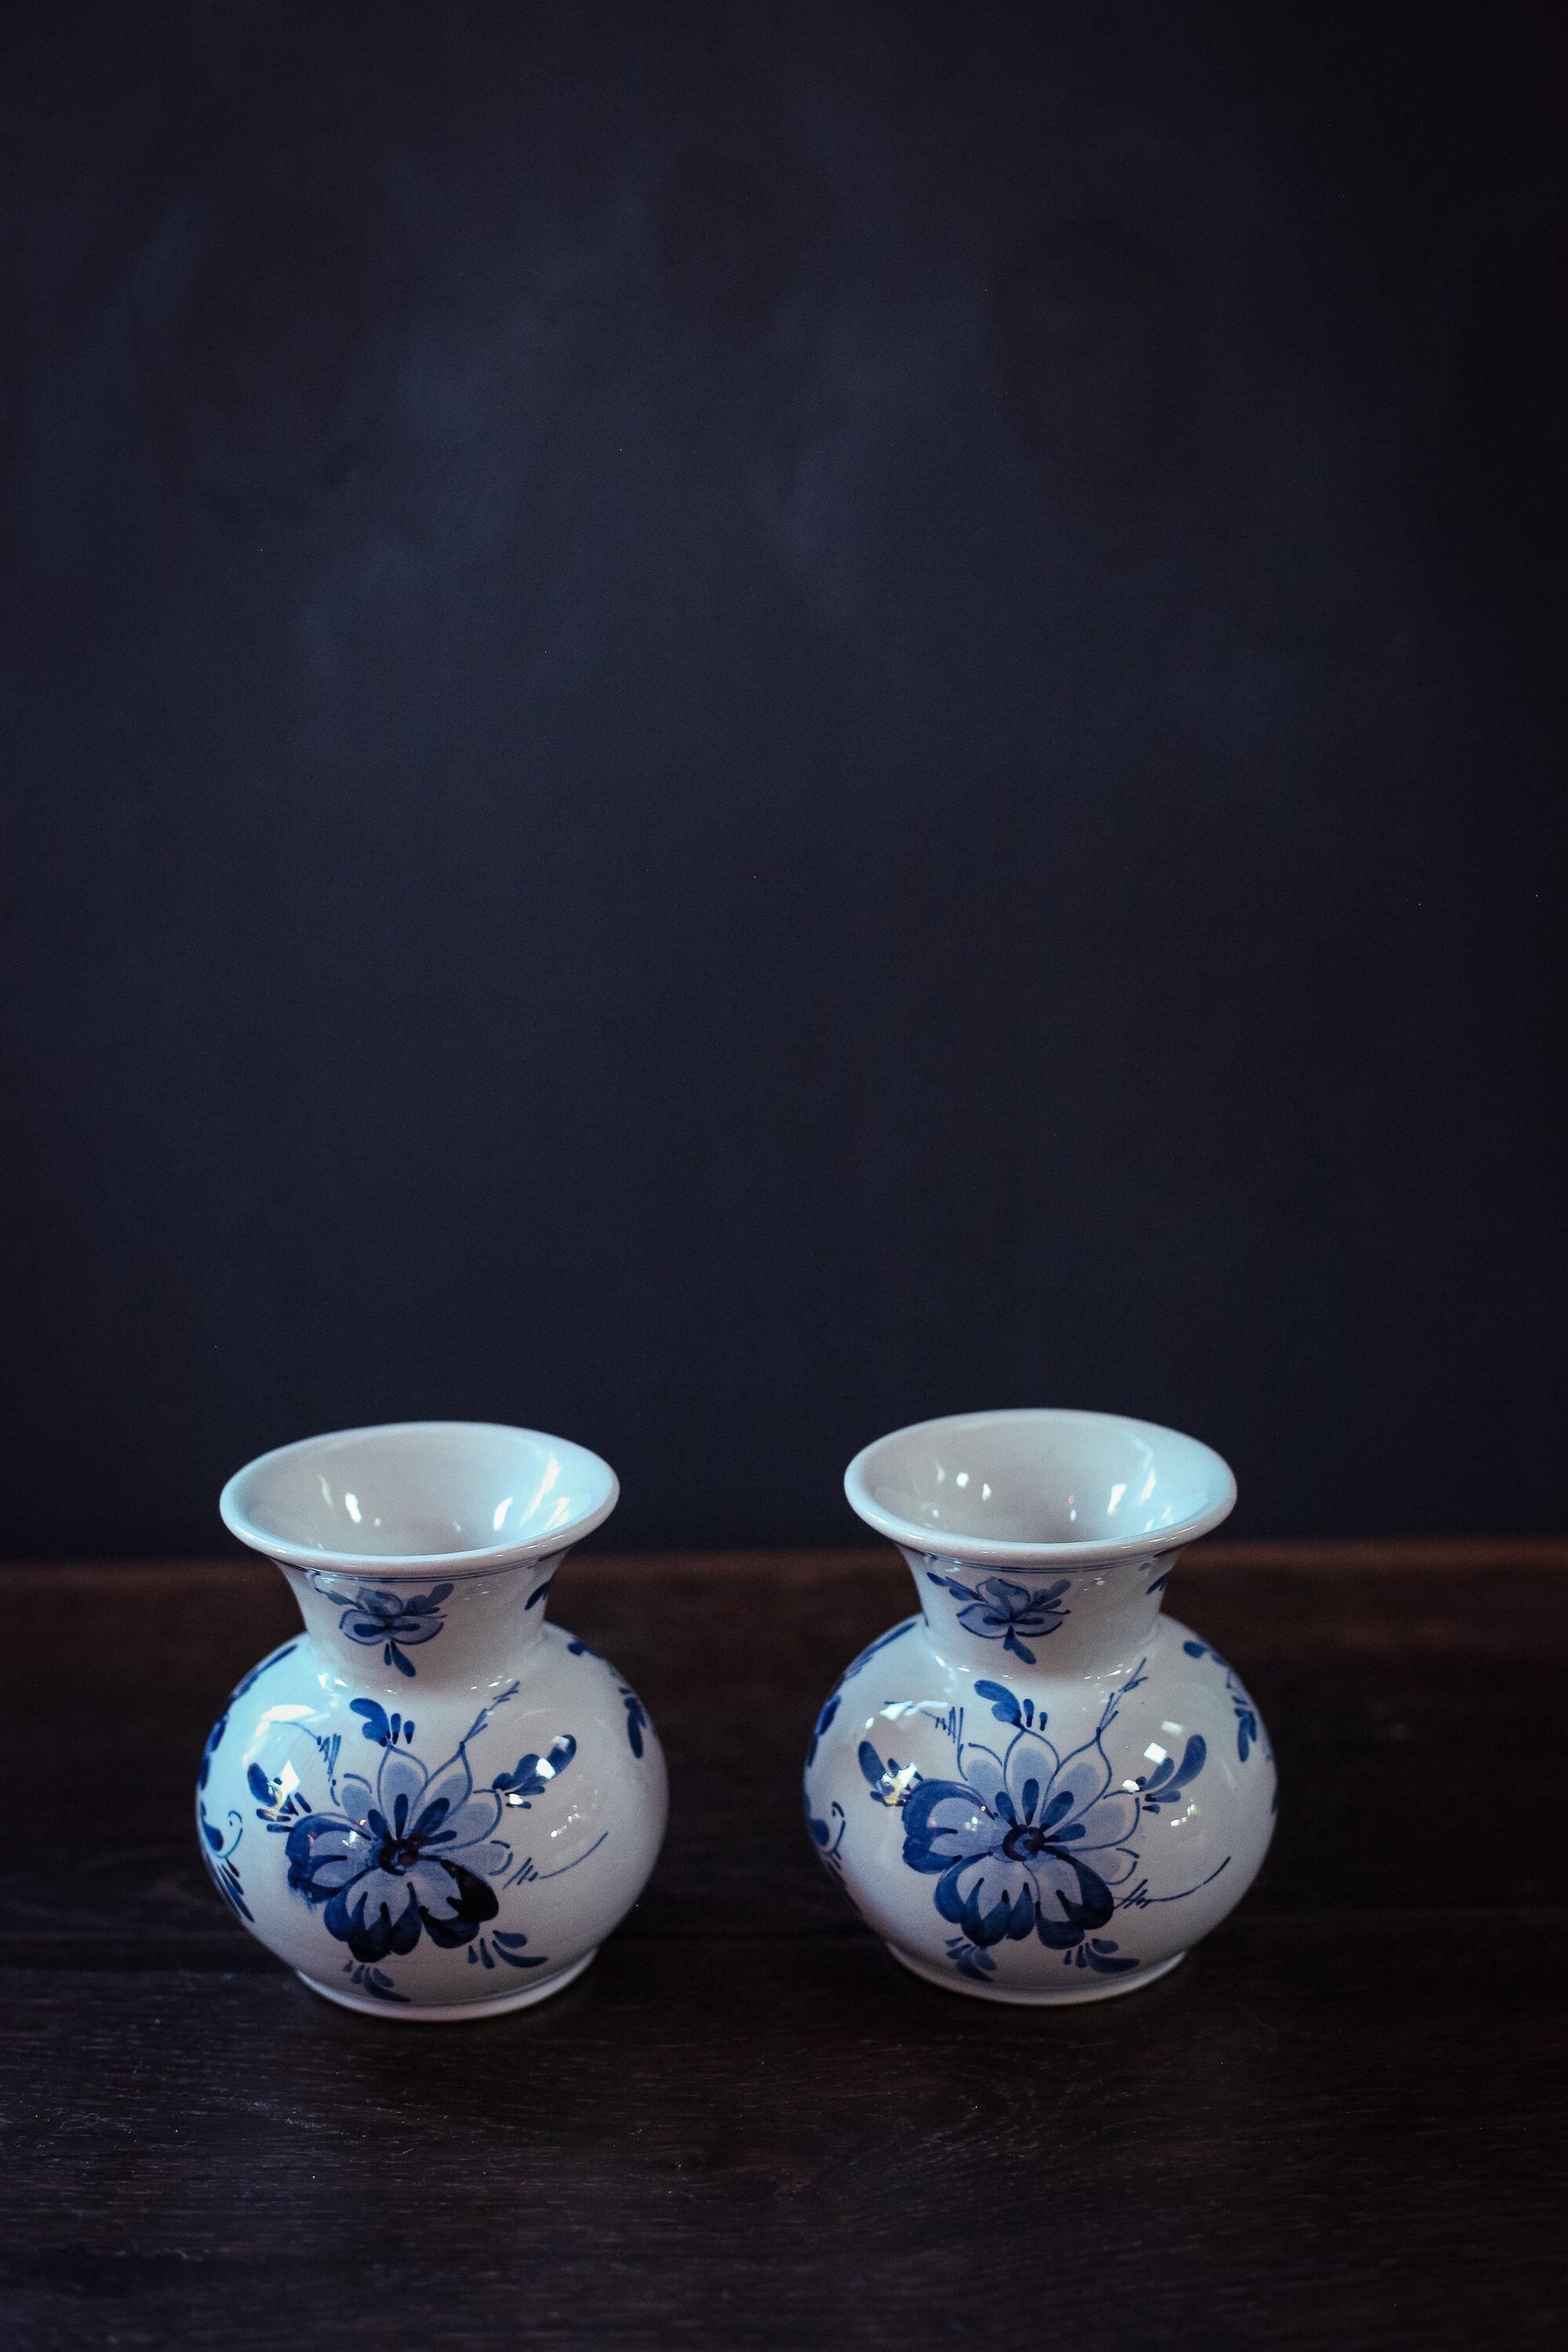 Pair of Blue White Delft Painted Vases - Set of 2 Vintage Hand Painted Vases